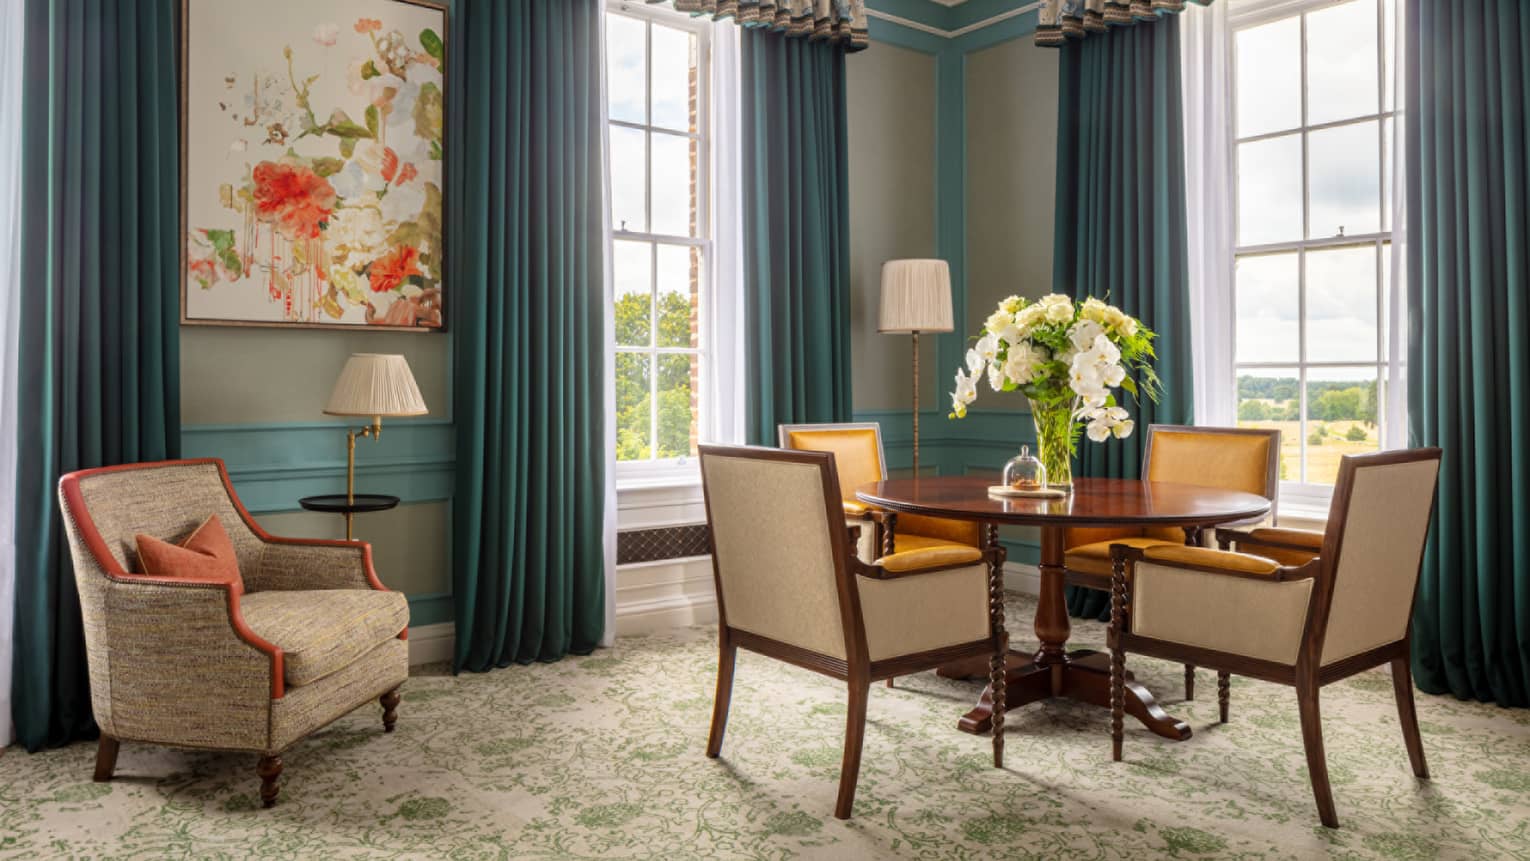 Guest room with round table and four dining chairs, tan accent chair, twin windows with blue drapes